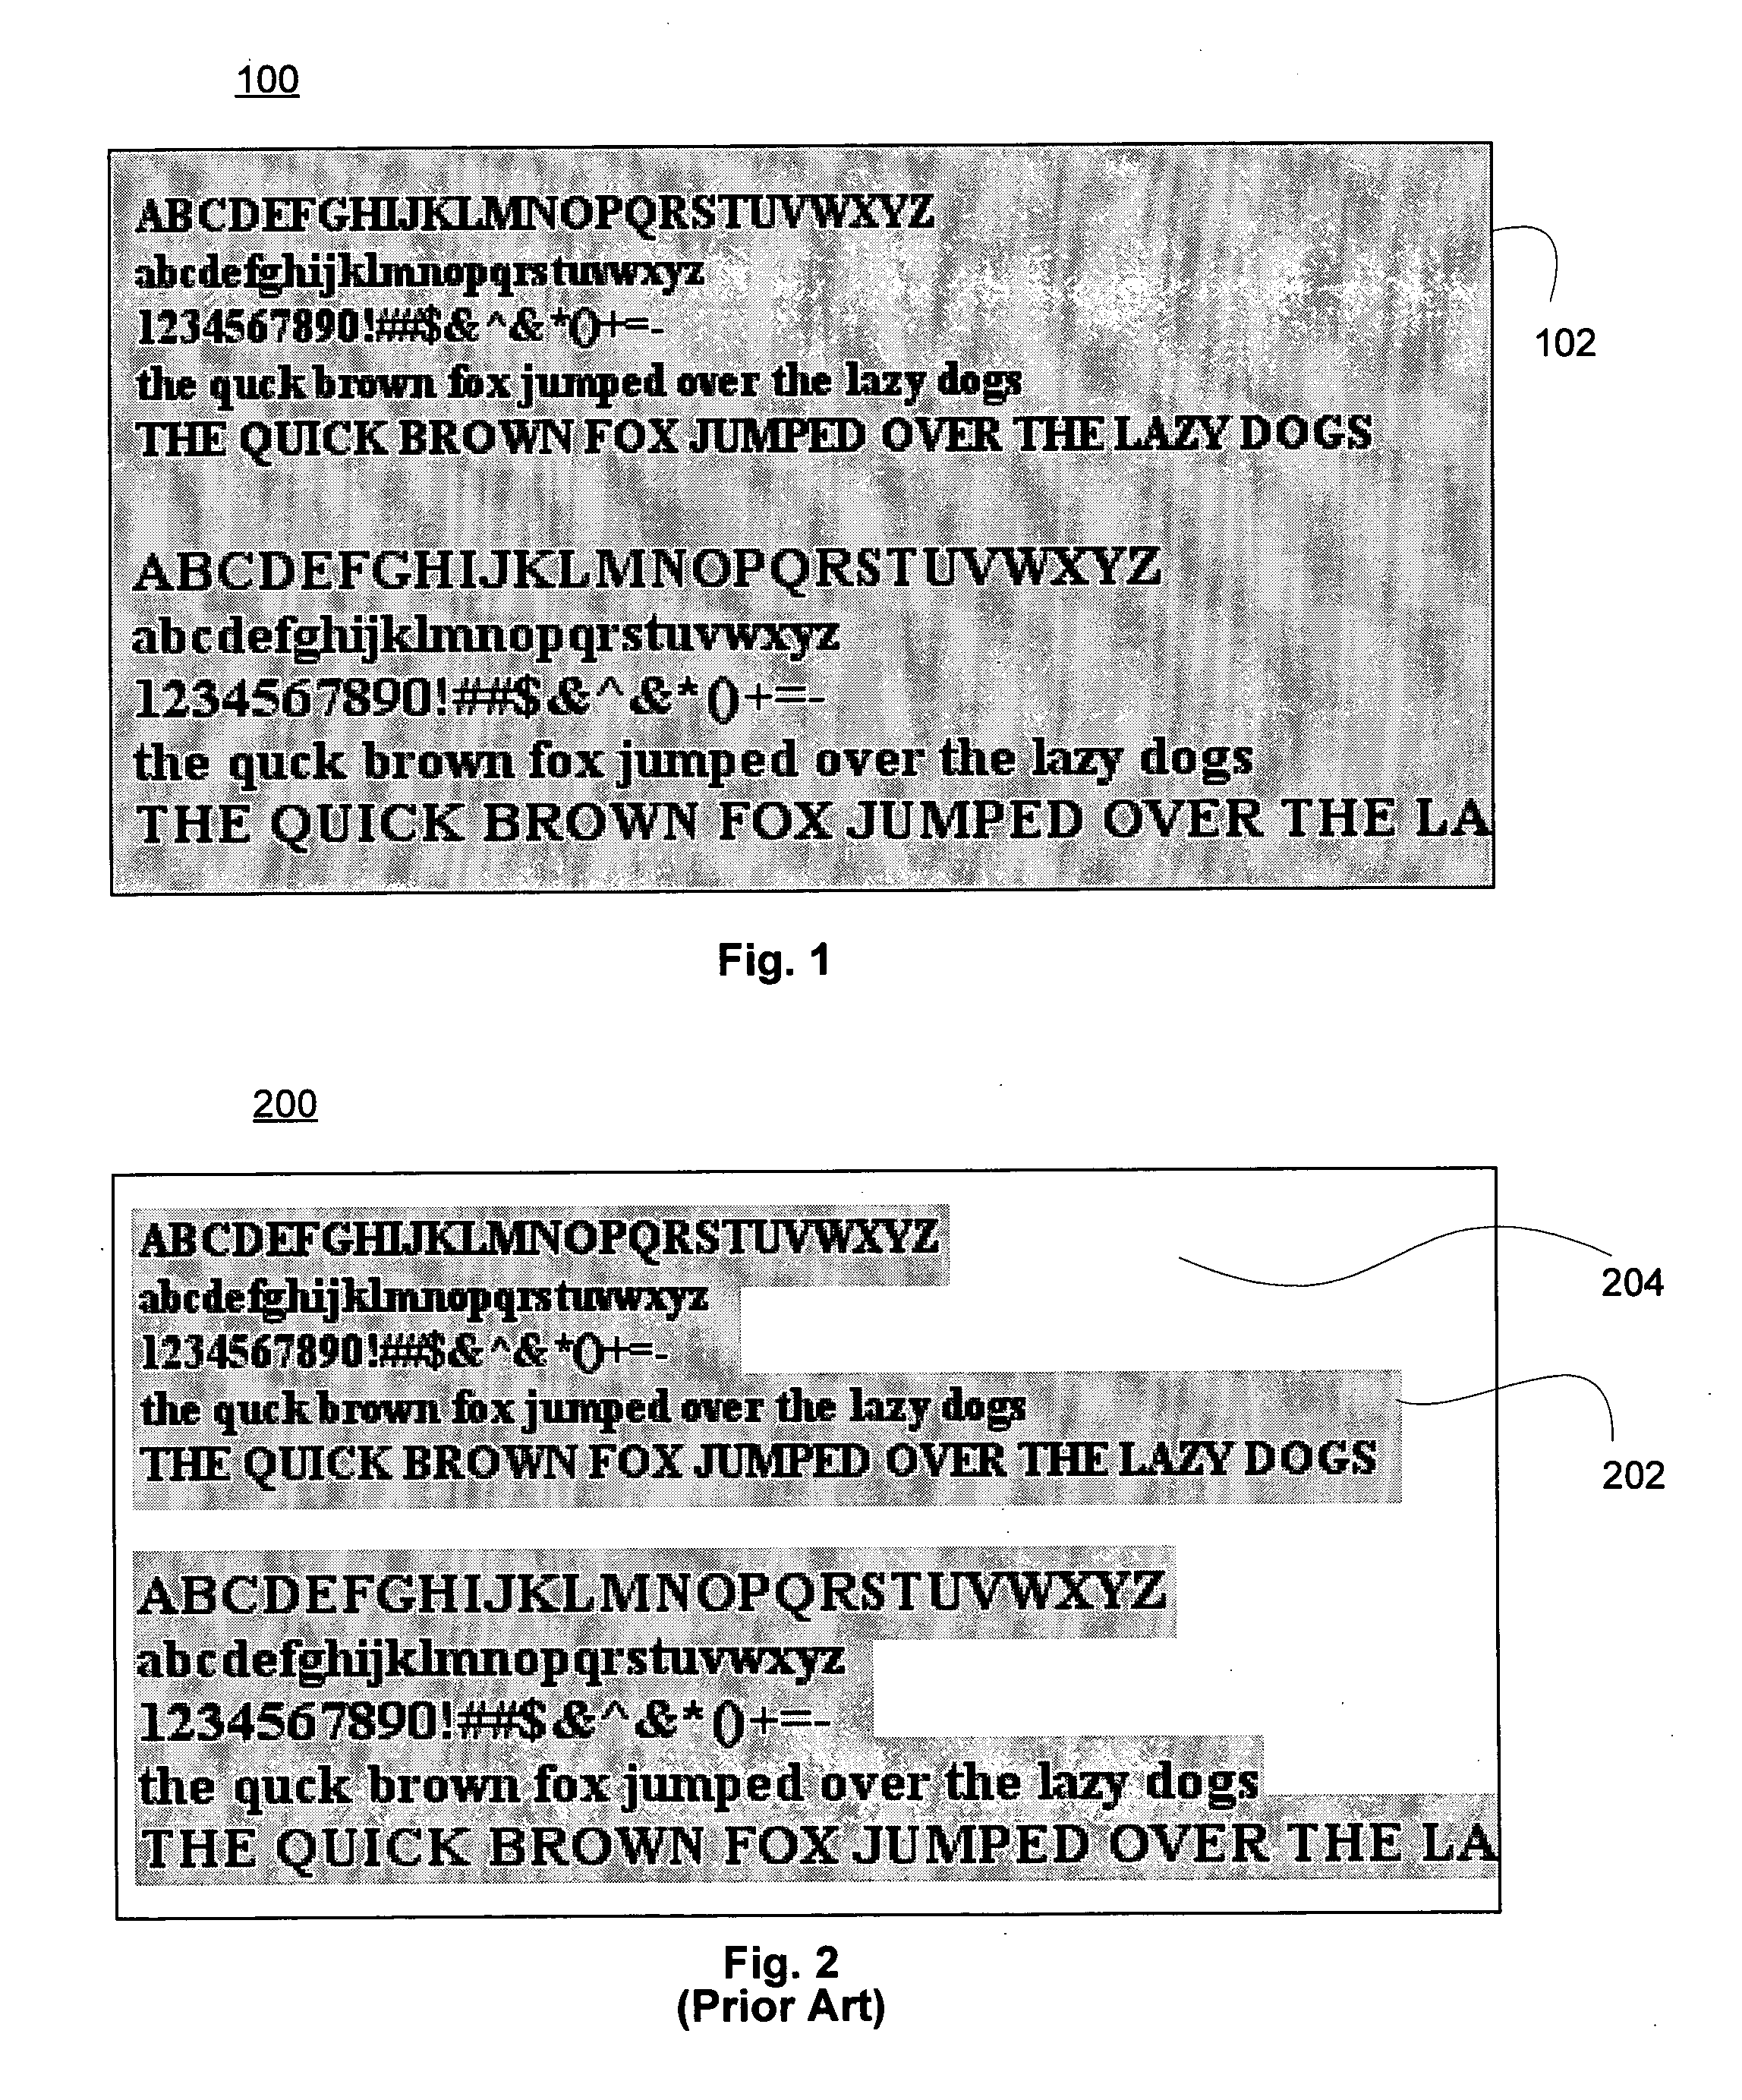 Method for image background detection and removal